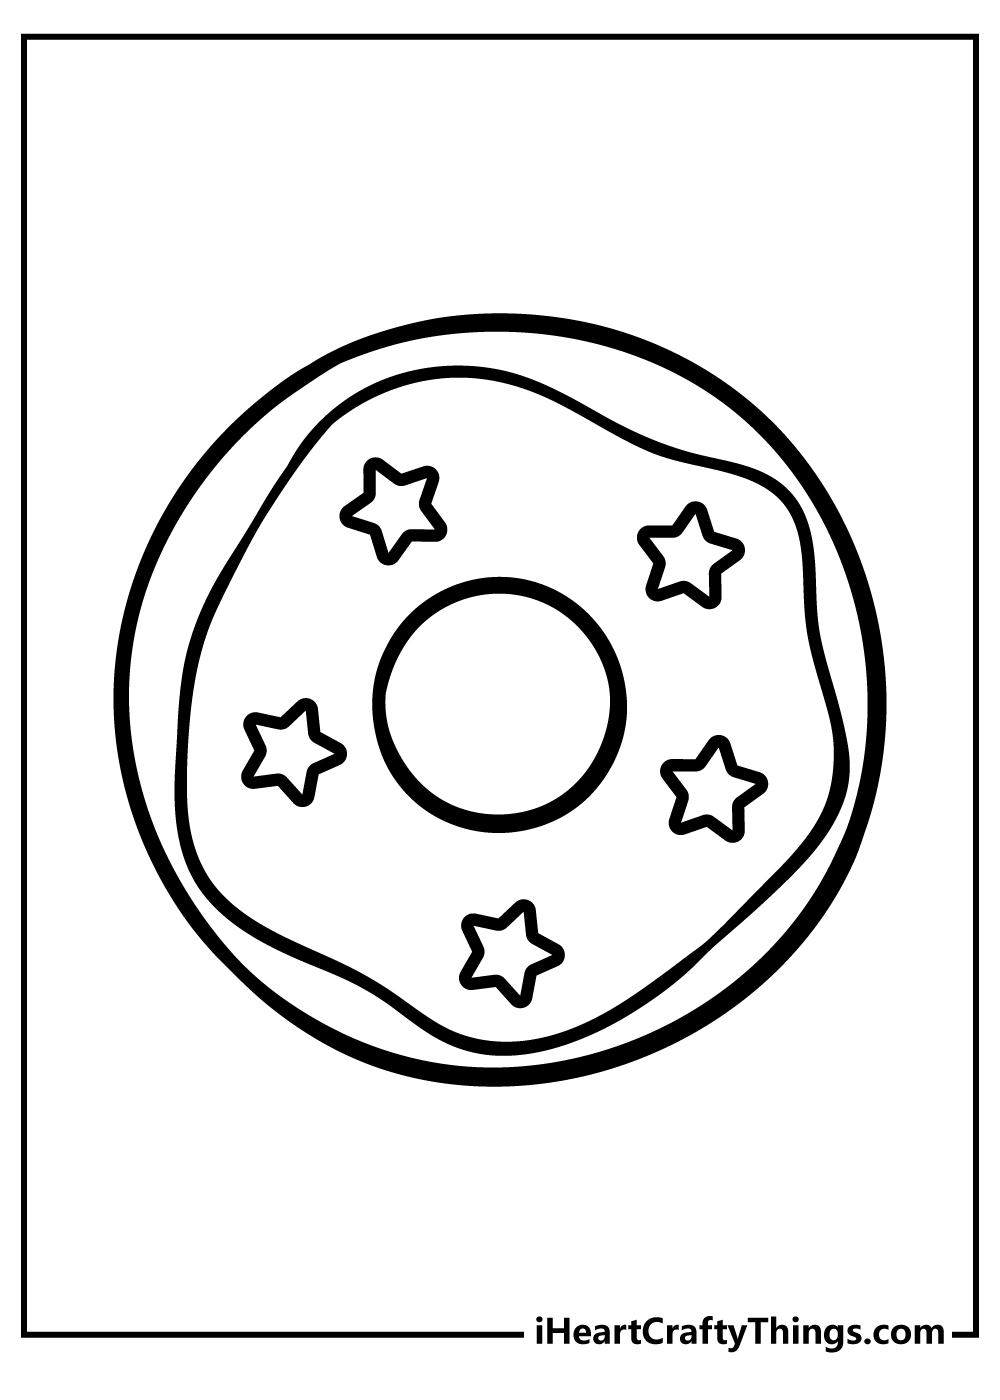 Donut Coloring Pages for adults free printable